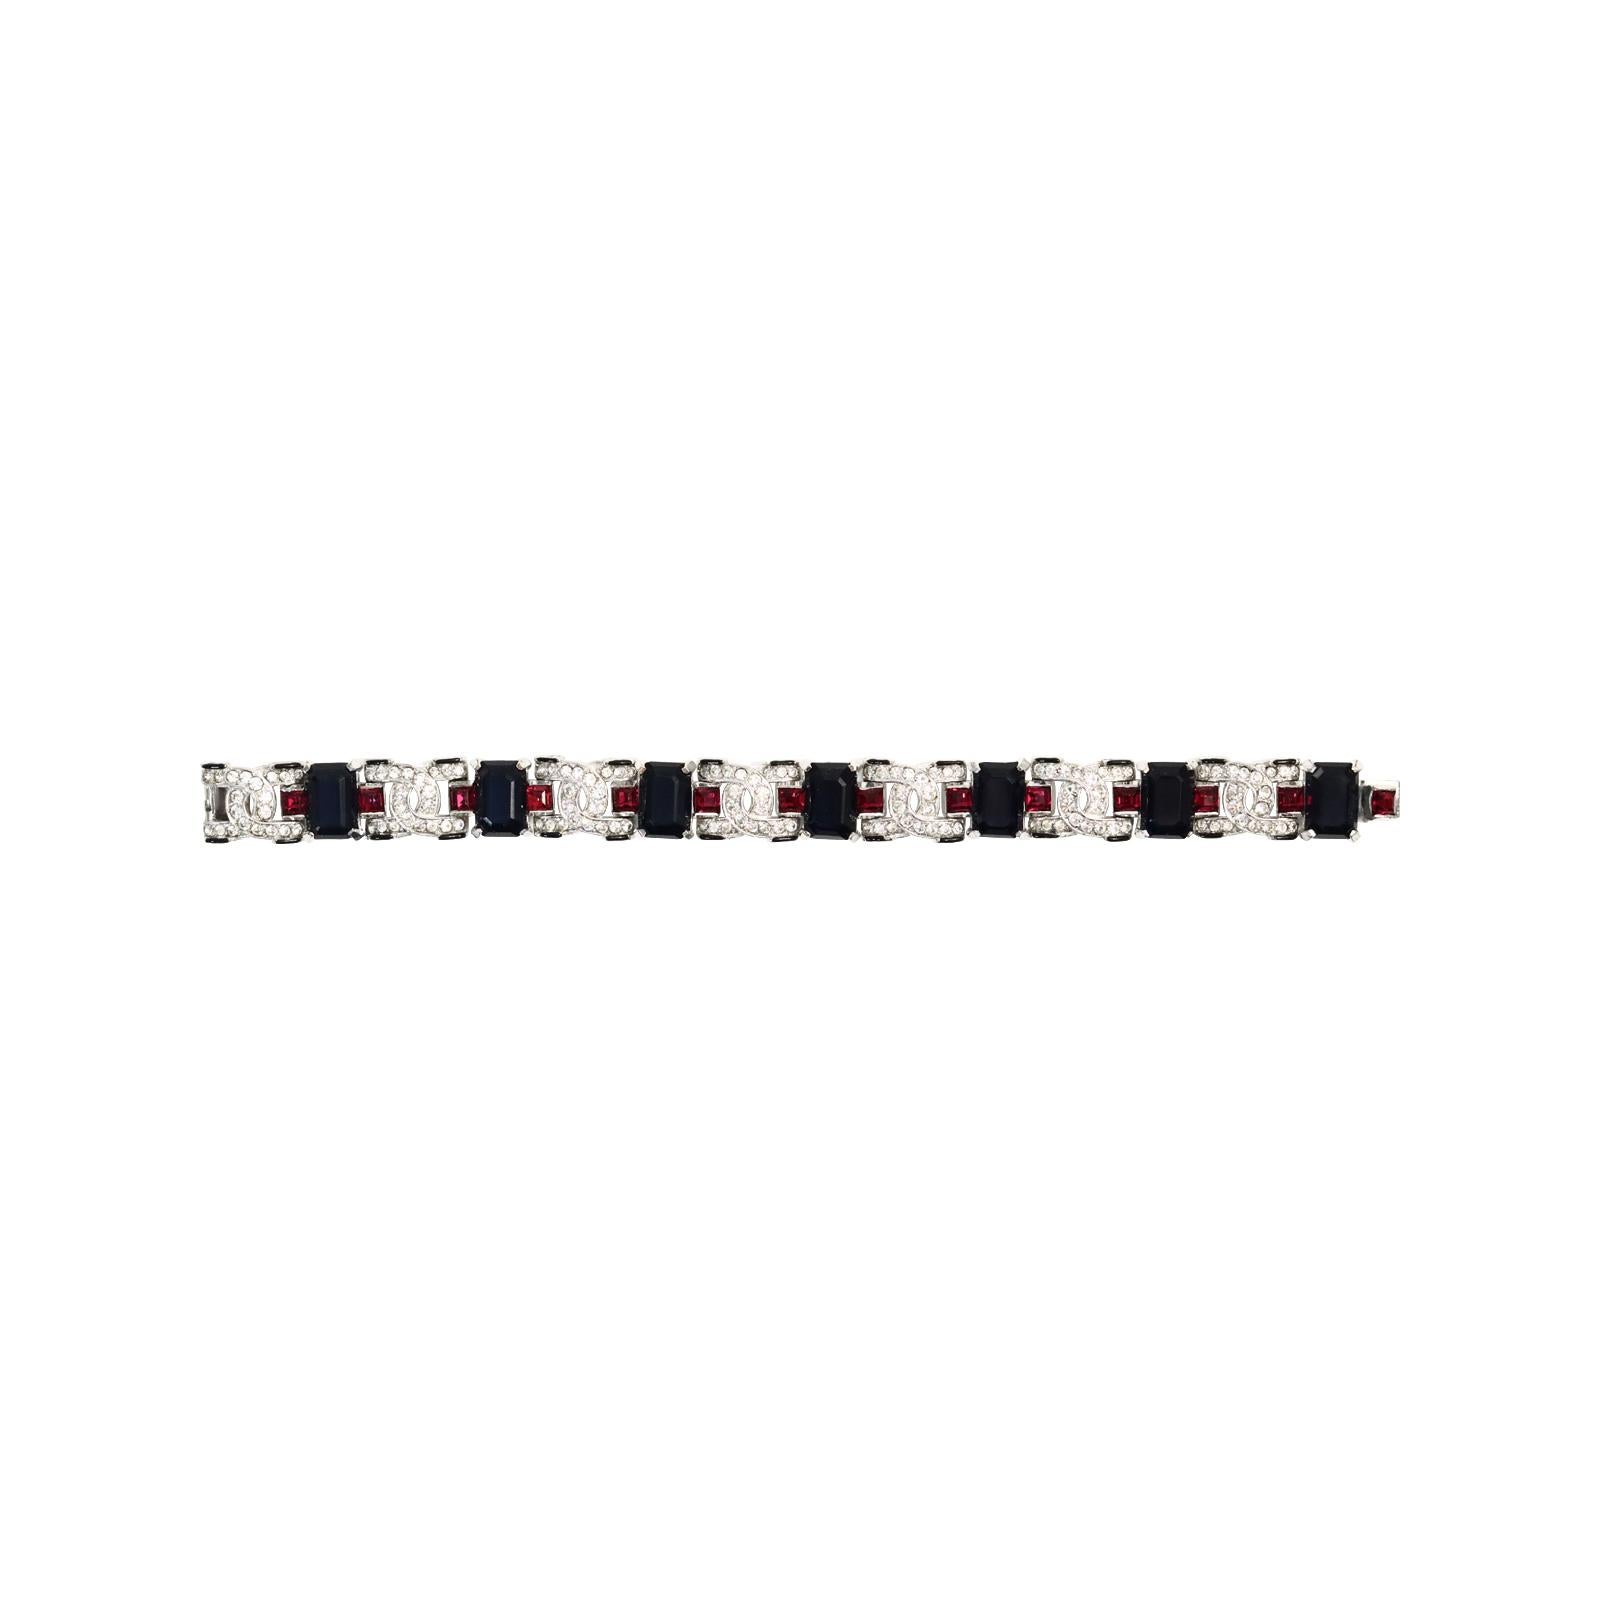 Vintage Art Deco with Red and Black Diamante Bracelet, circa 1960s For Sale 1